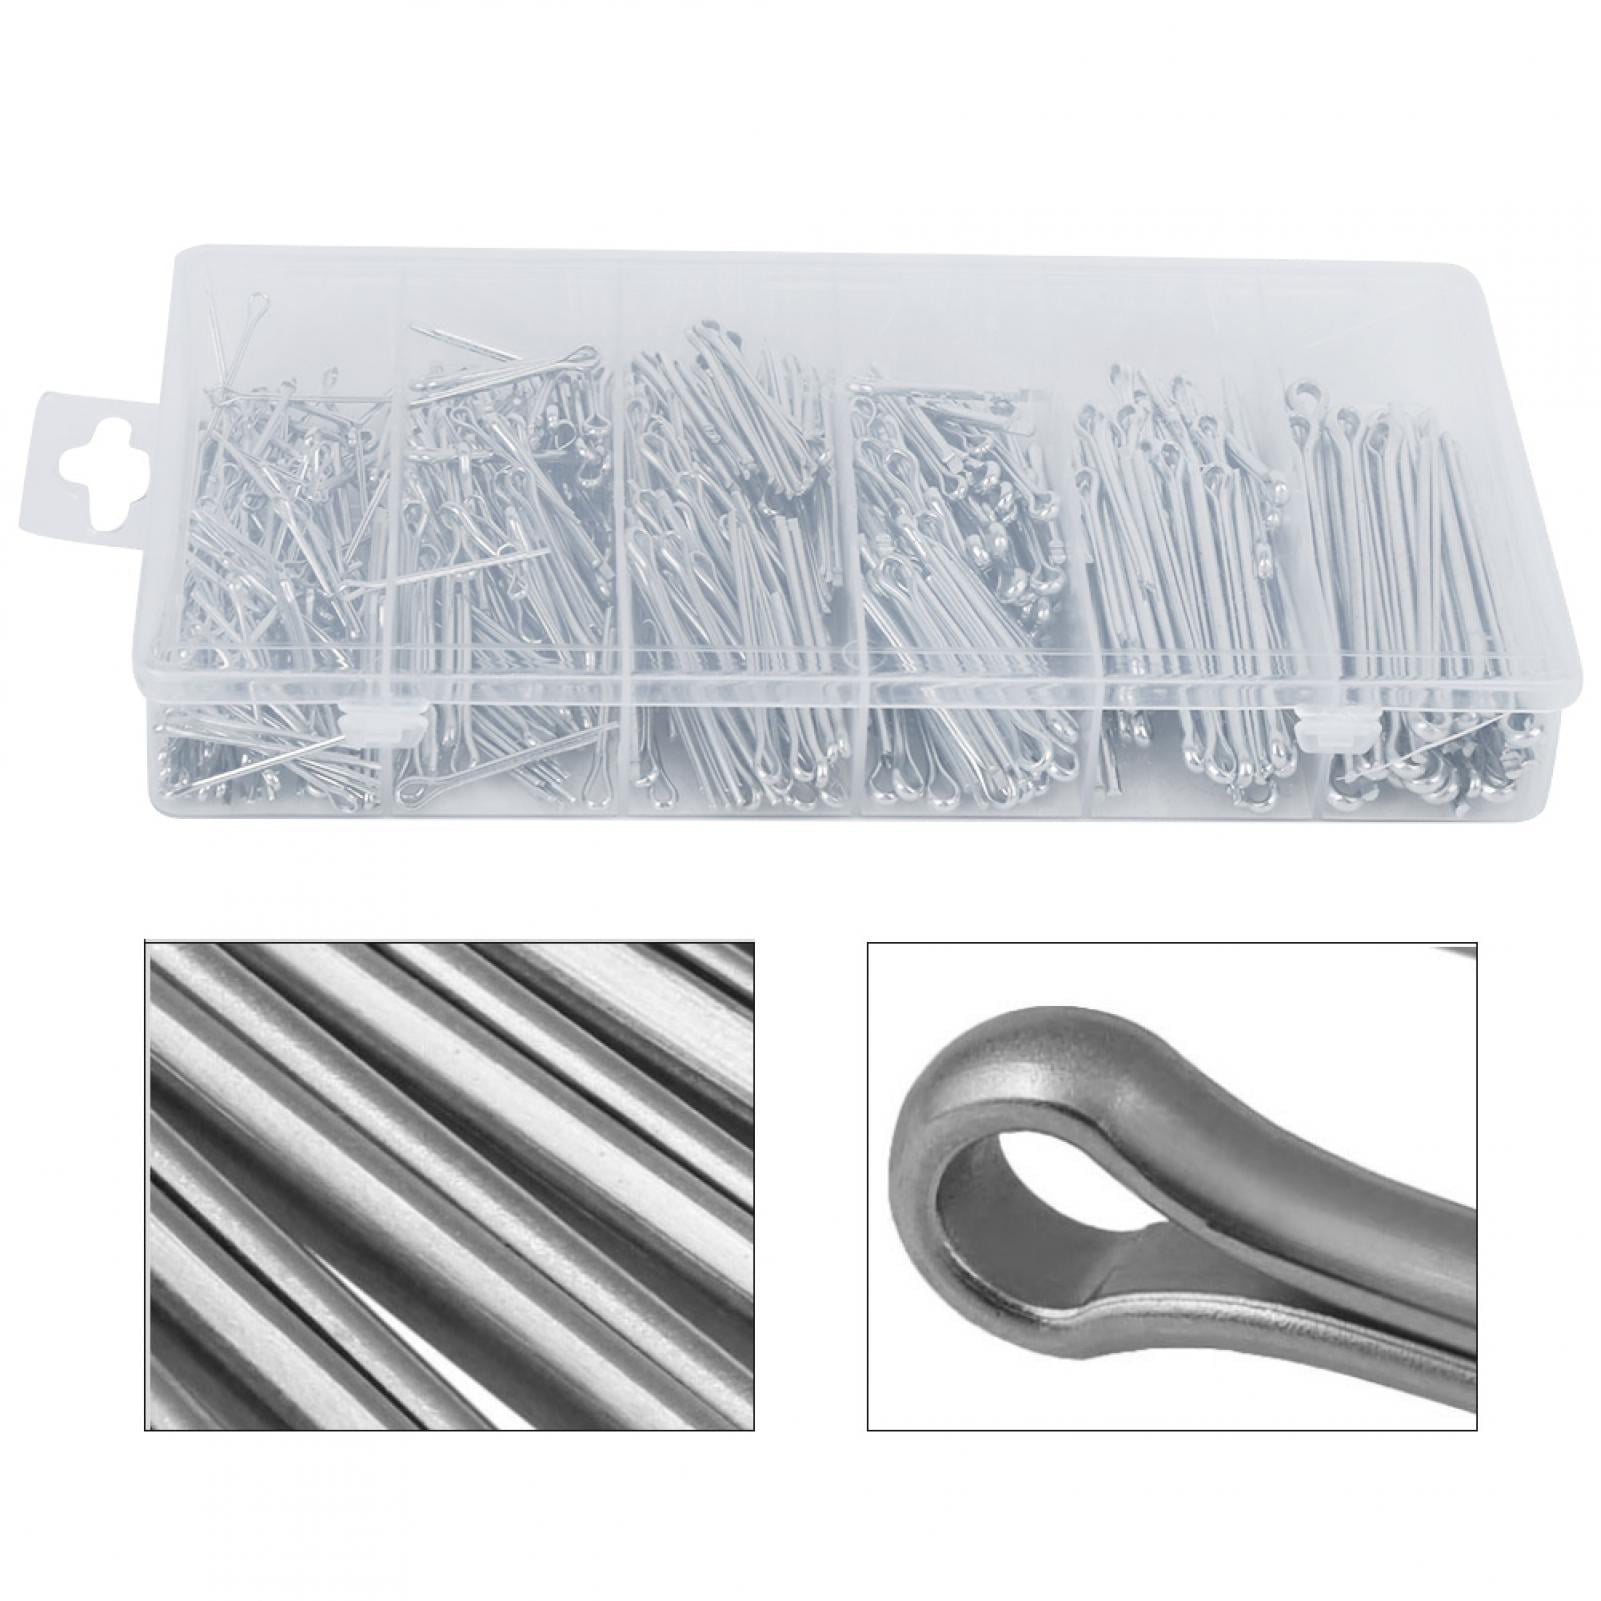 10PCS Stainless Steel Split Cotter Pins Hardware Fasteners Parts  M2 M3 M4 M5 FO 